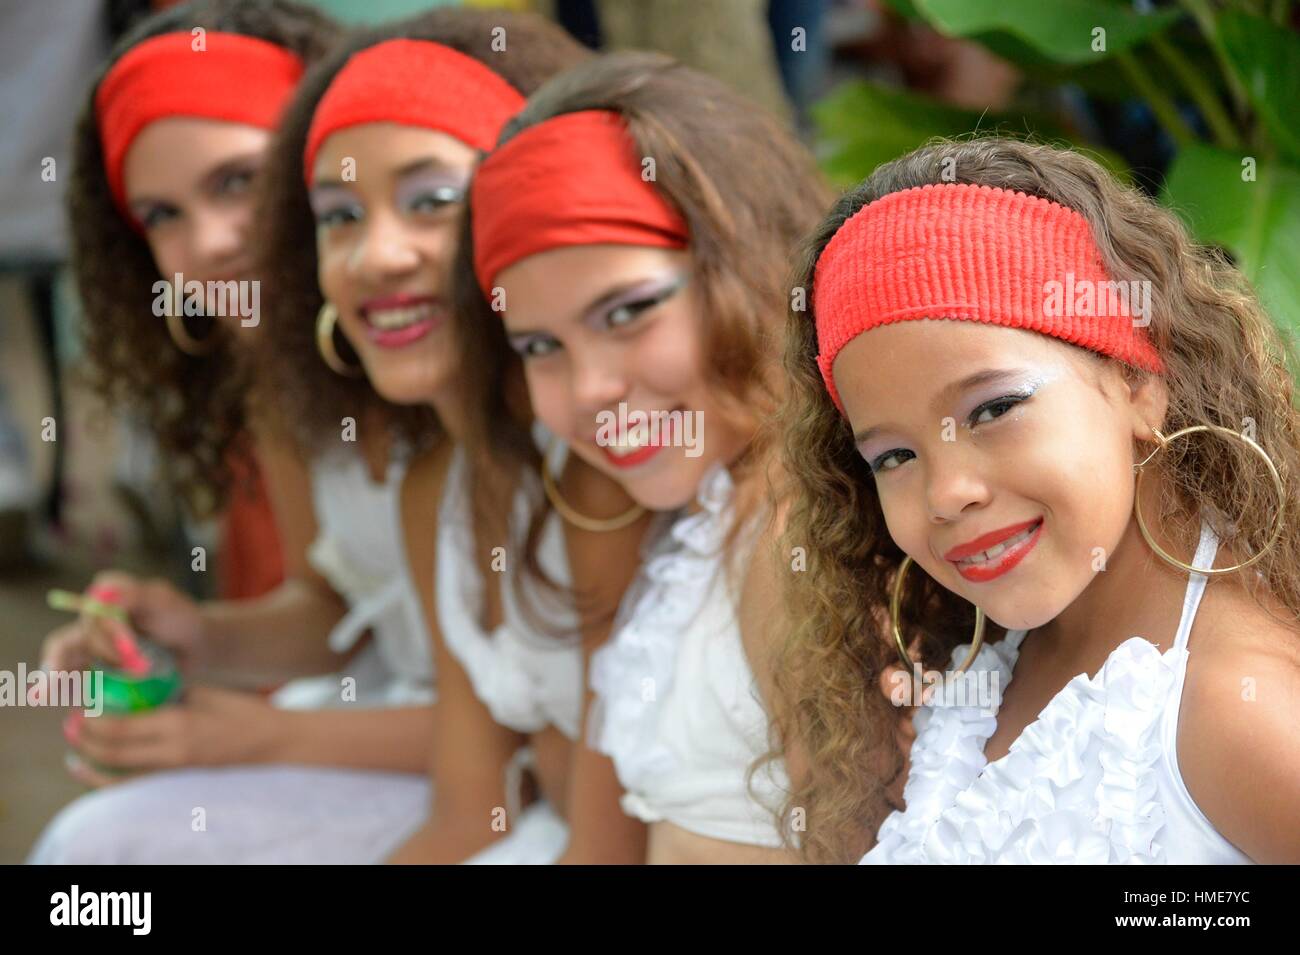 Portrait of girls with traditional clothing un Cienfuegos, Cuba. Stock Photo